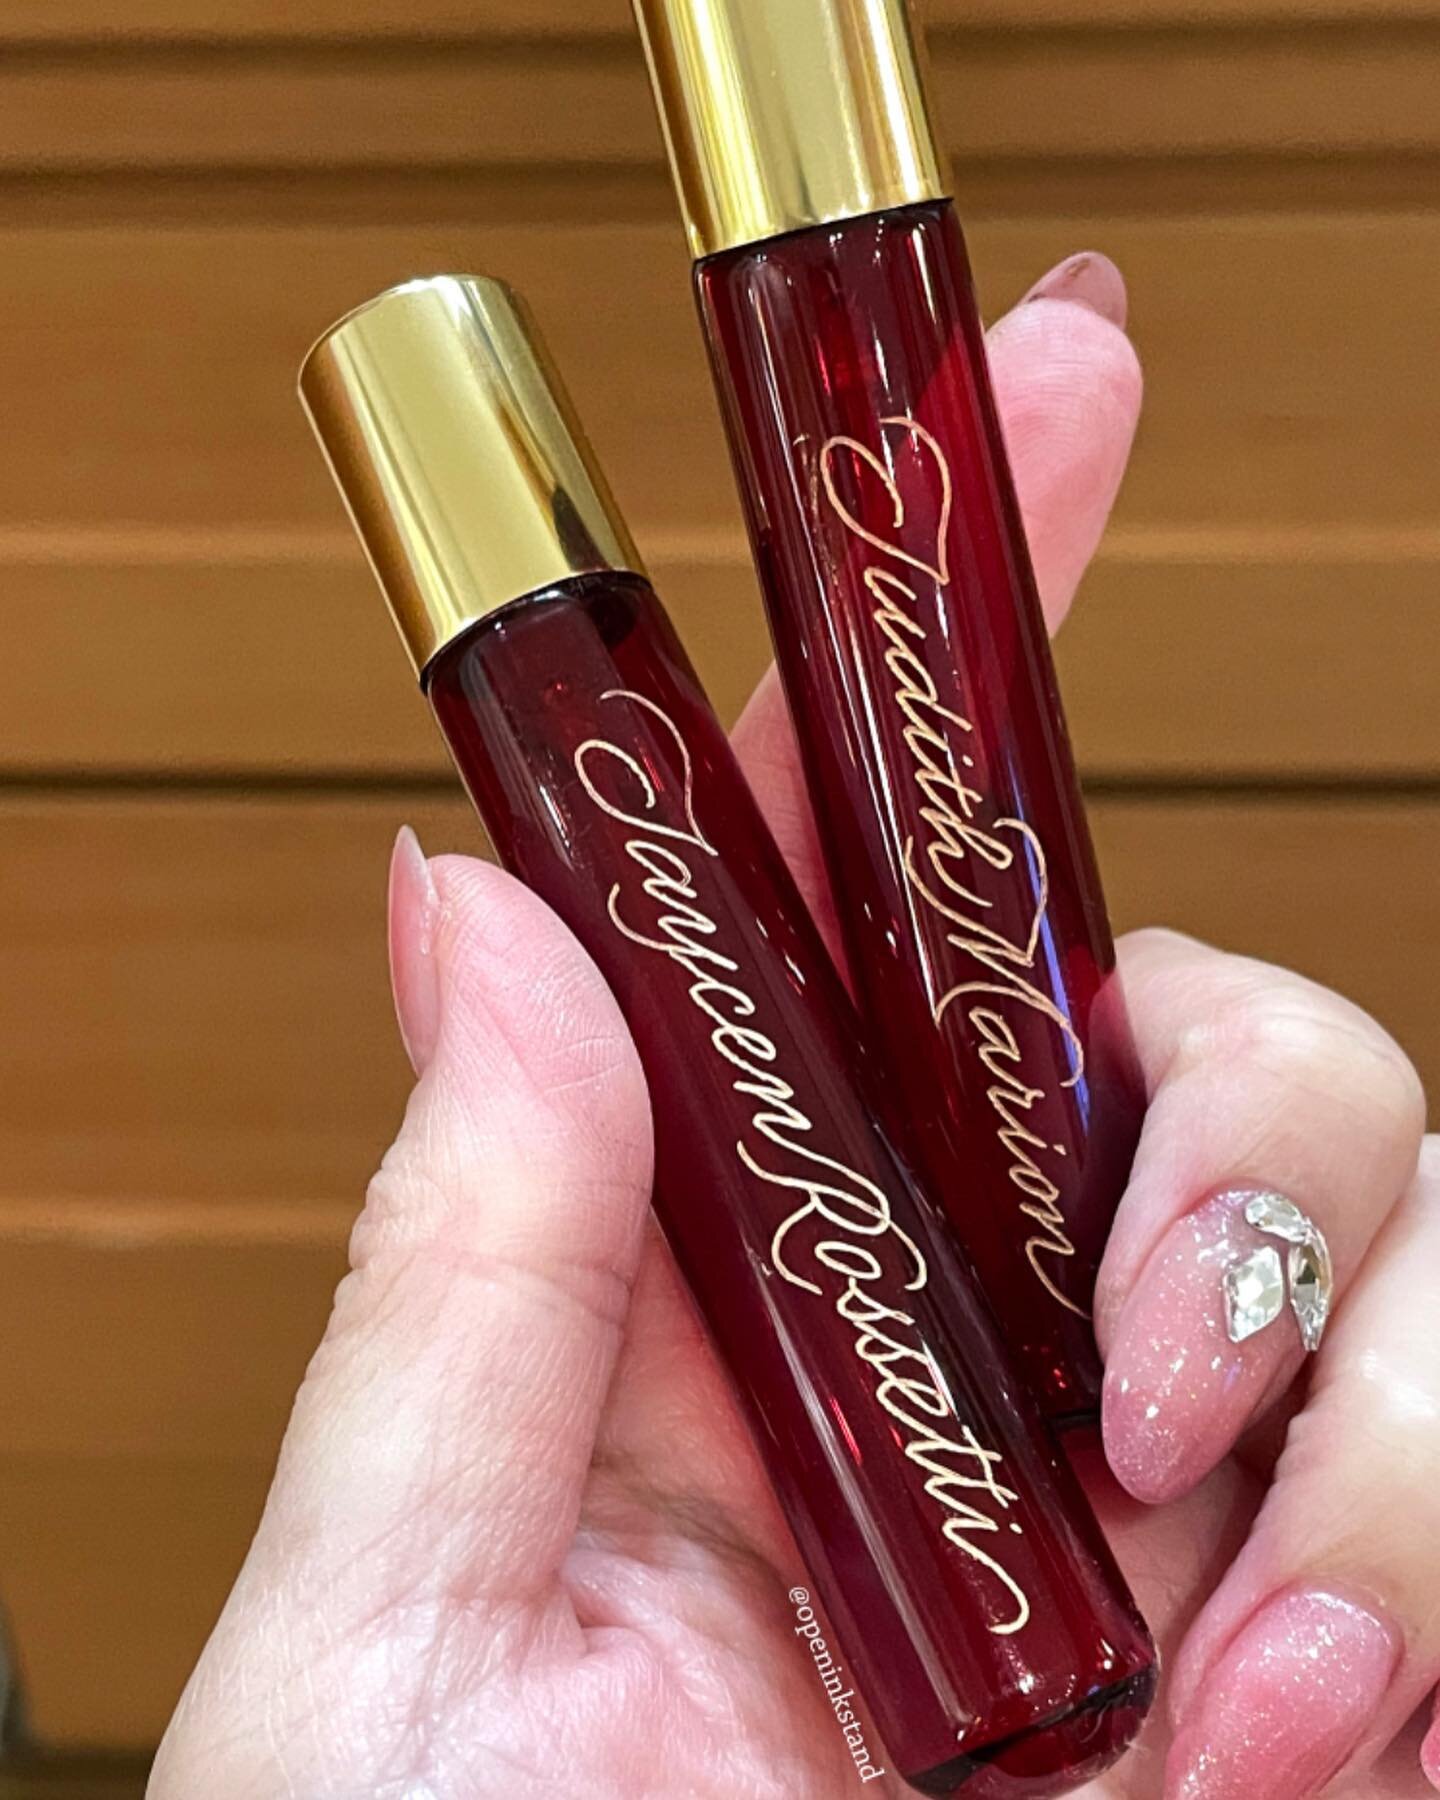 These beautiful little red beauties are glass vials filled with delicious fragrance from Cartier. My favorite scent is their La Panthere, it smells so delicious. I engraved these vials as personalized fragrance sample gifts for VIPs.. thanks for havi